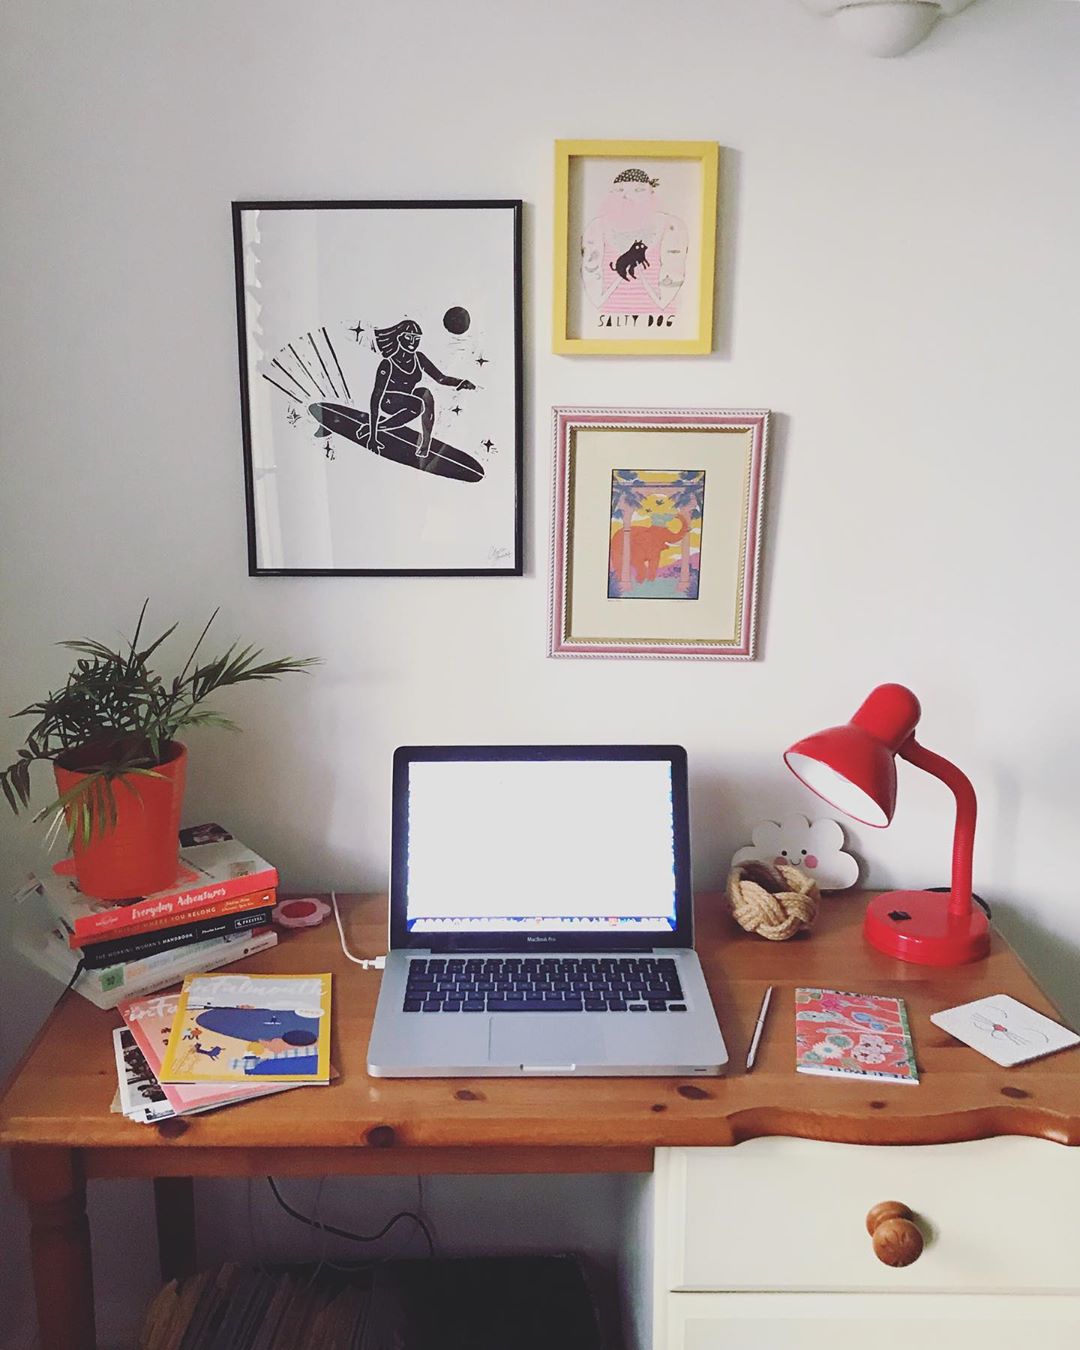 Computer on desk and colorful paintings on the wall. Photo by Instagram user @infalmouth